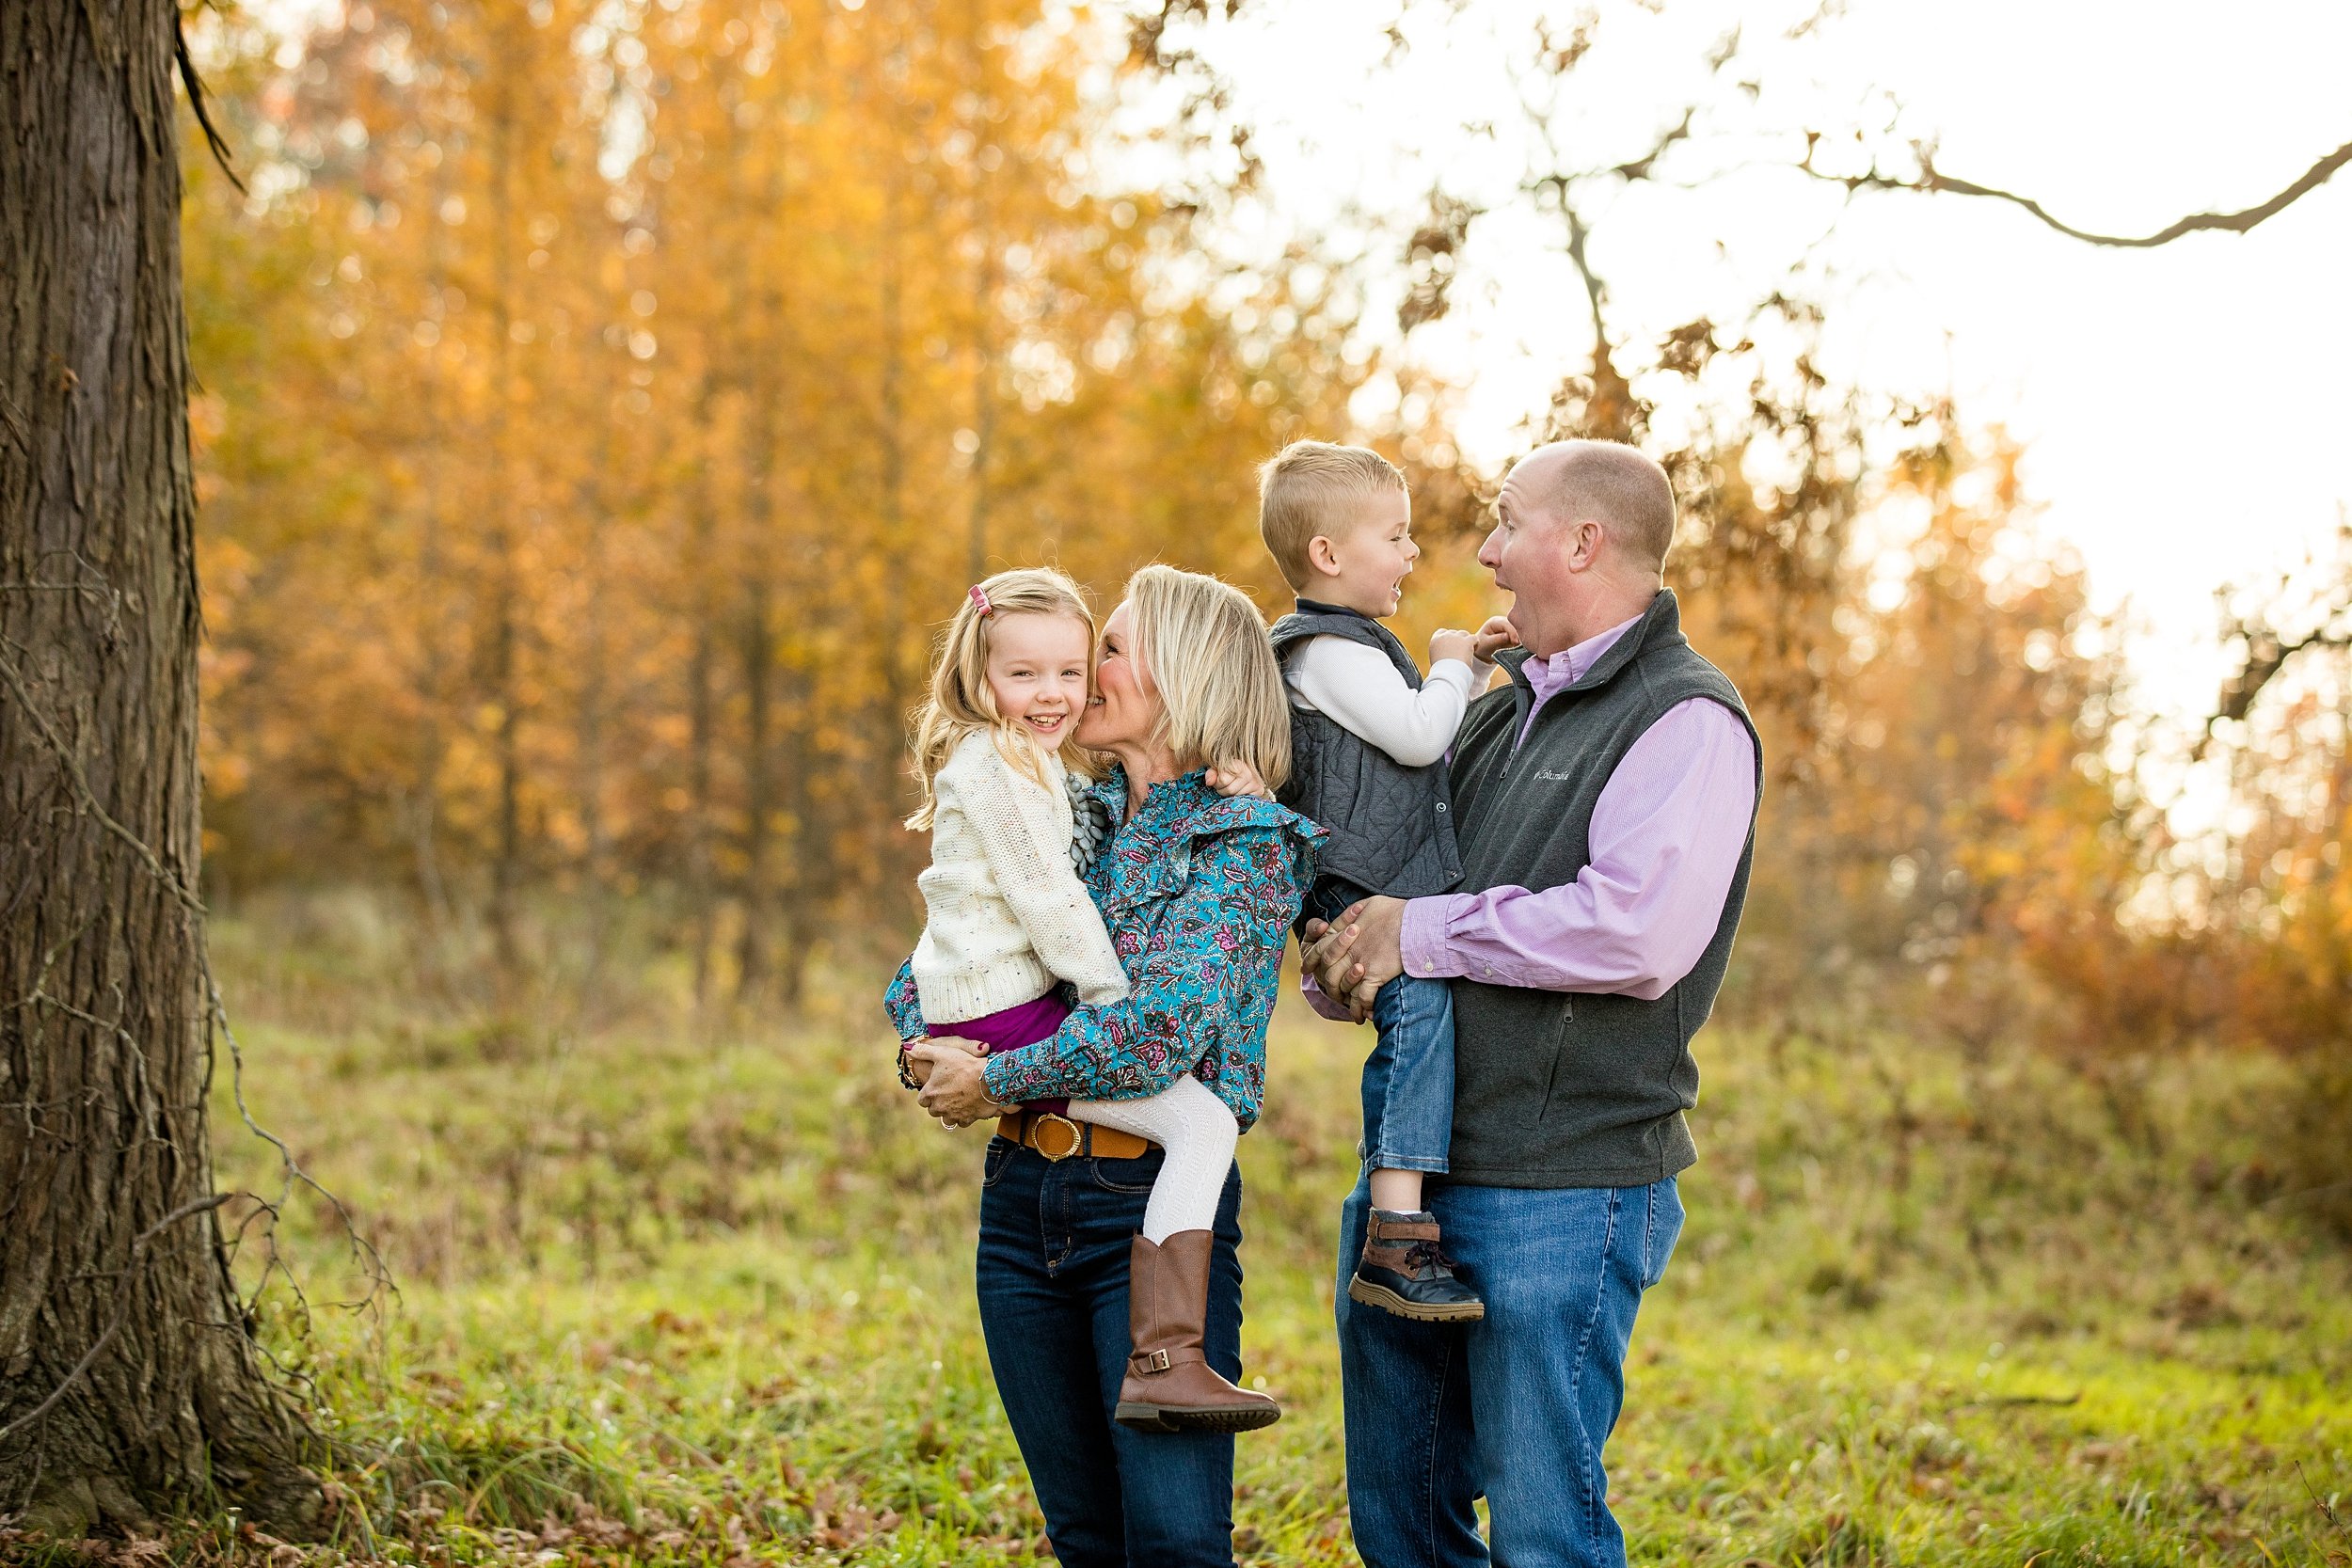 north park family photos, pittsburgh family photographer, cranberry township photographer, zelienople photographer